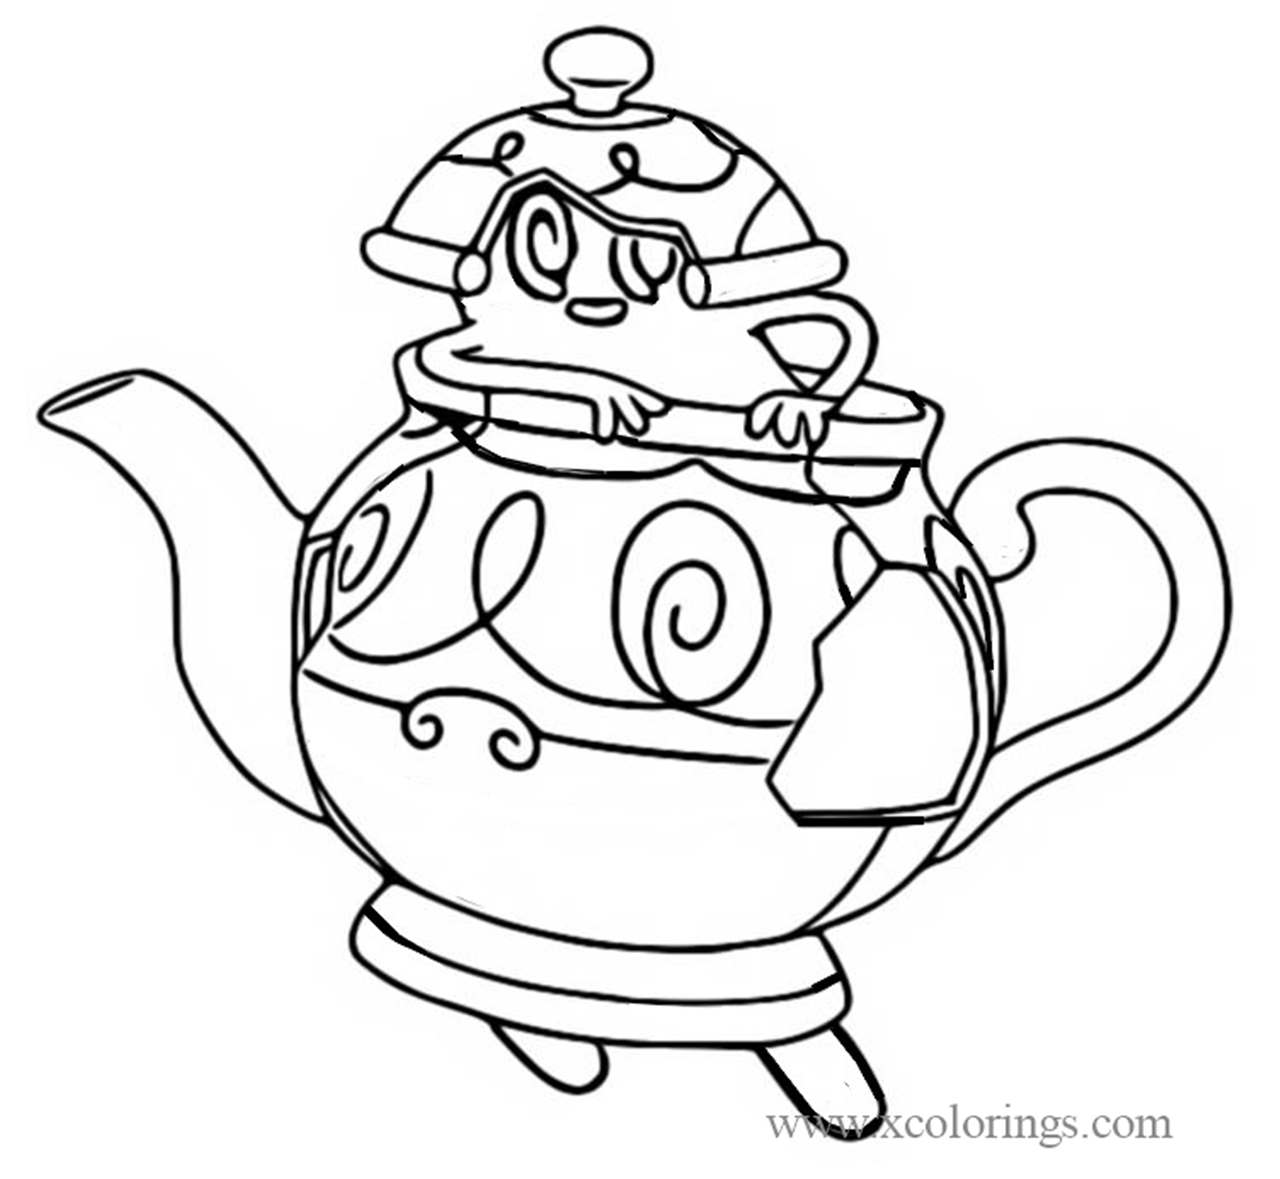 Free Polteageist from Pokemon Sword and Shield Coloring Pages printable